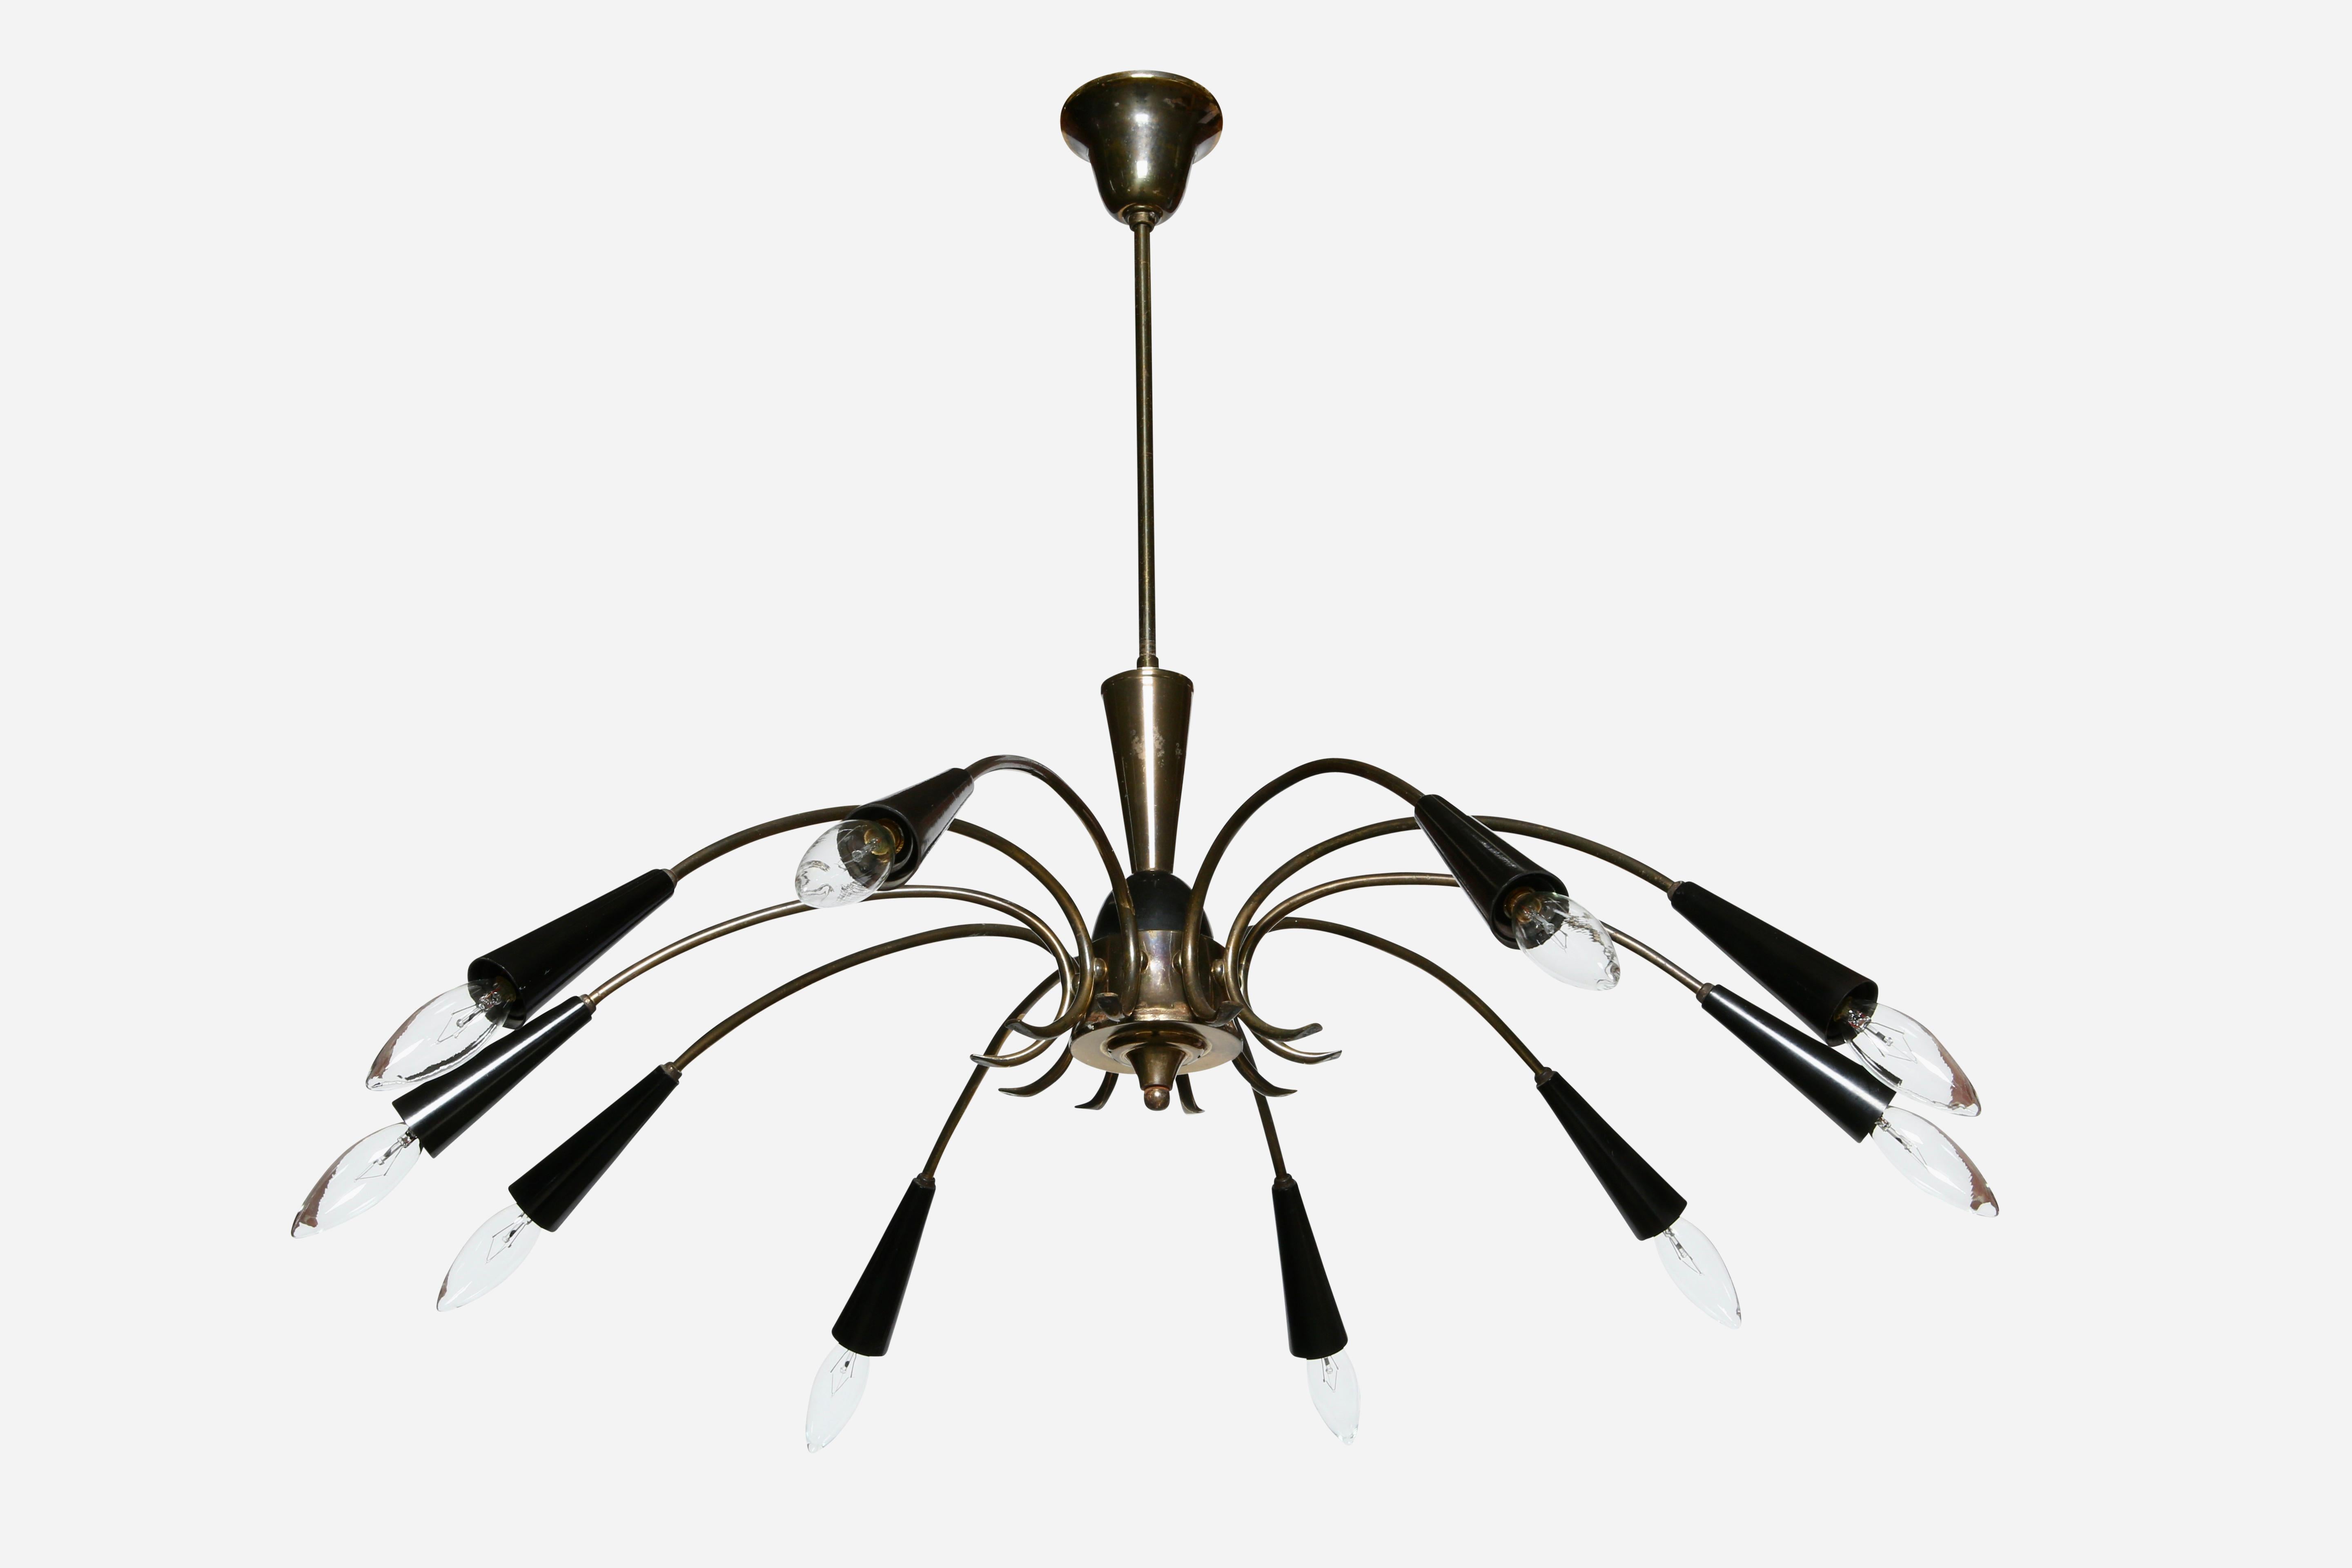 Sputnik brass chandelier.
Germany, 1960s
Patinated brass, enameled metal.
10 arms with candelabra sockets.

We take pride in bringing vintage fixtures to their full glory again.
At Illustris Lighting our main focus is to deliver lighting fixtures to